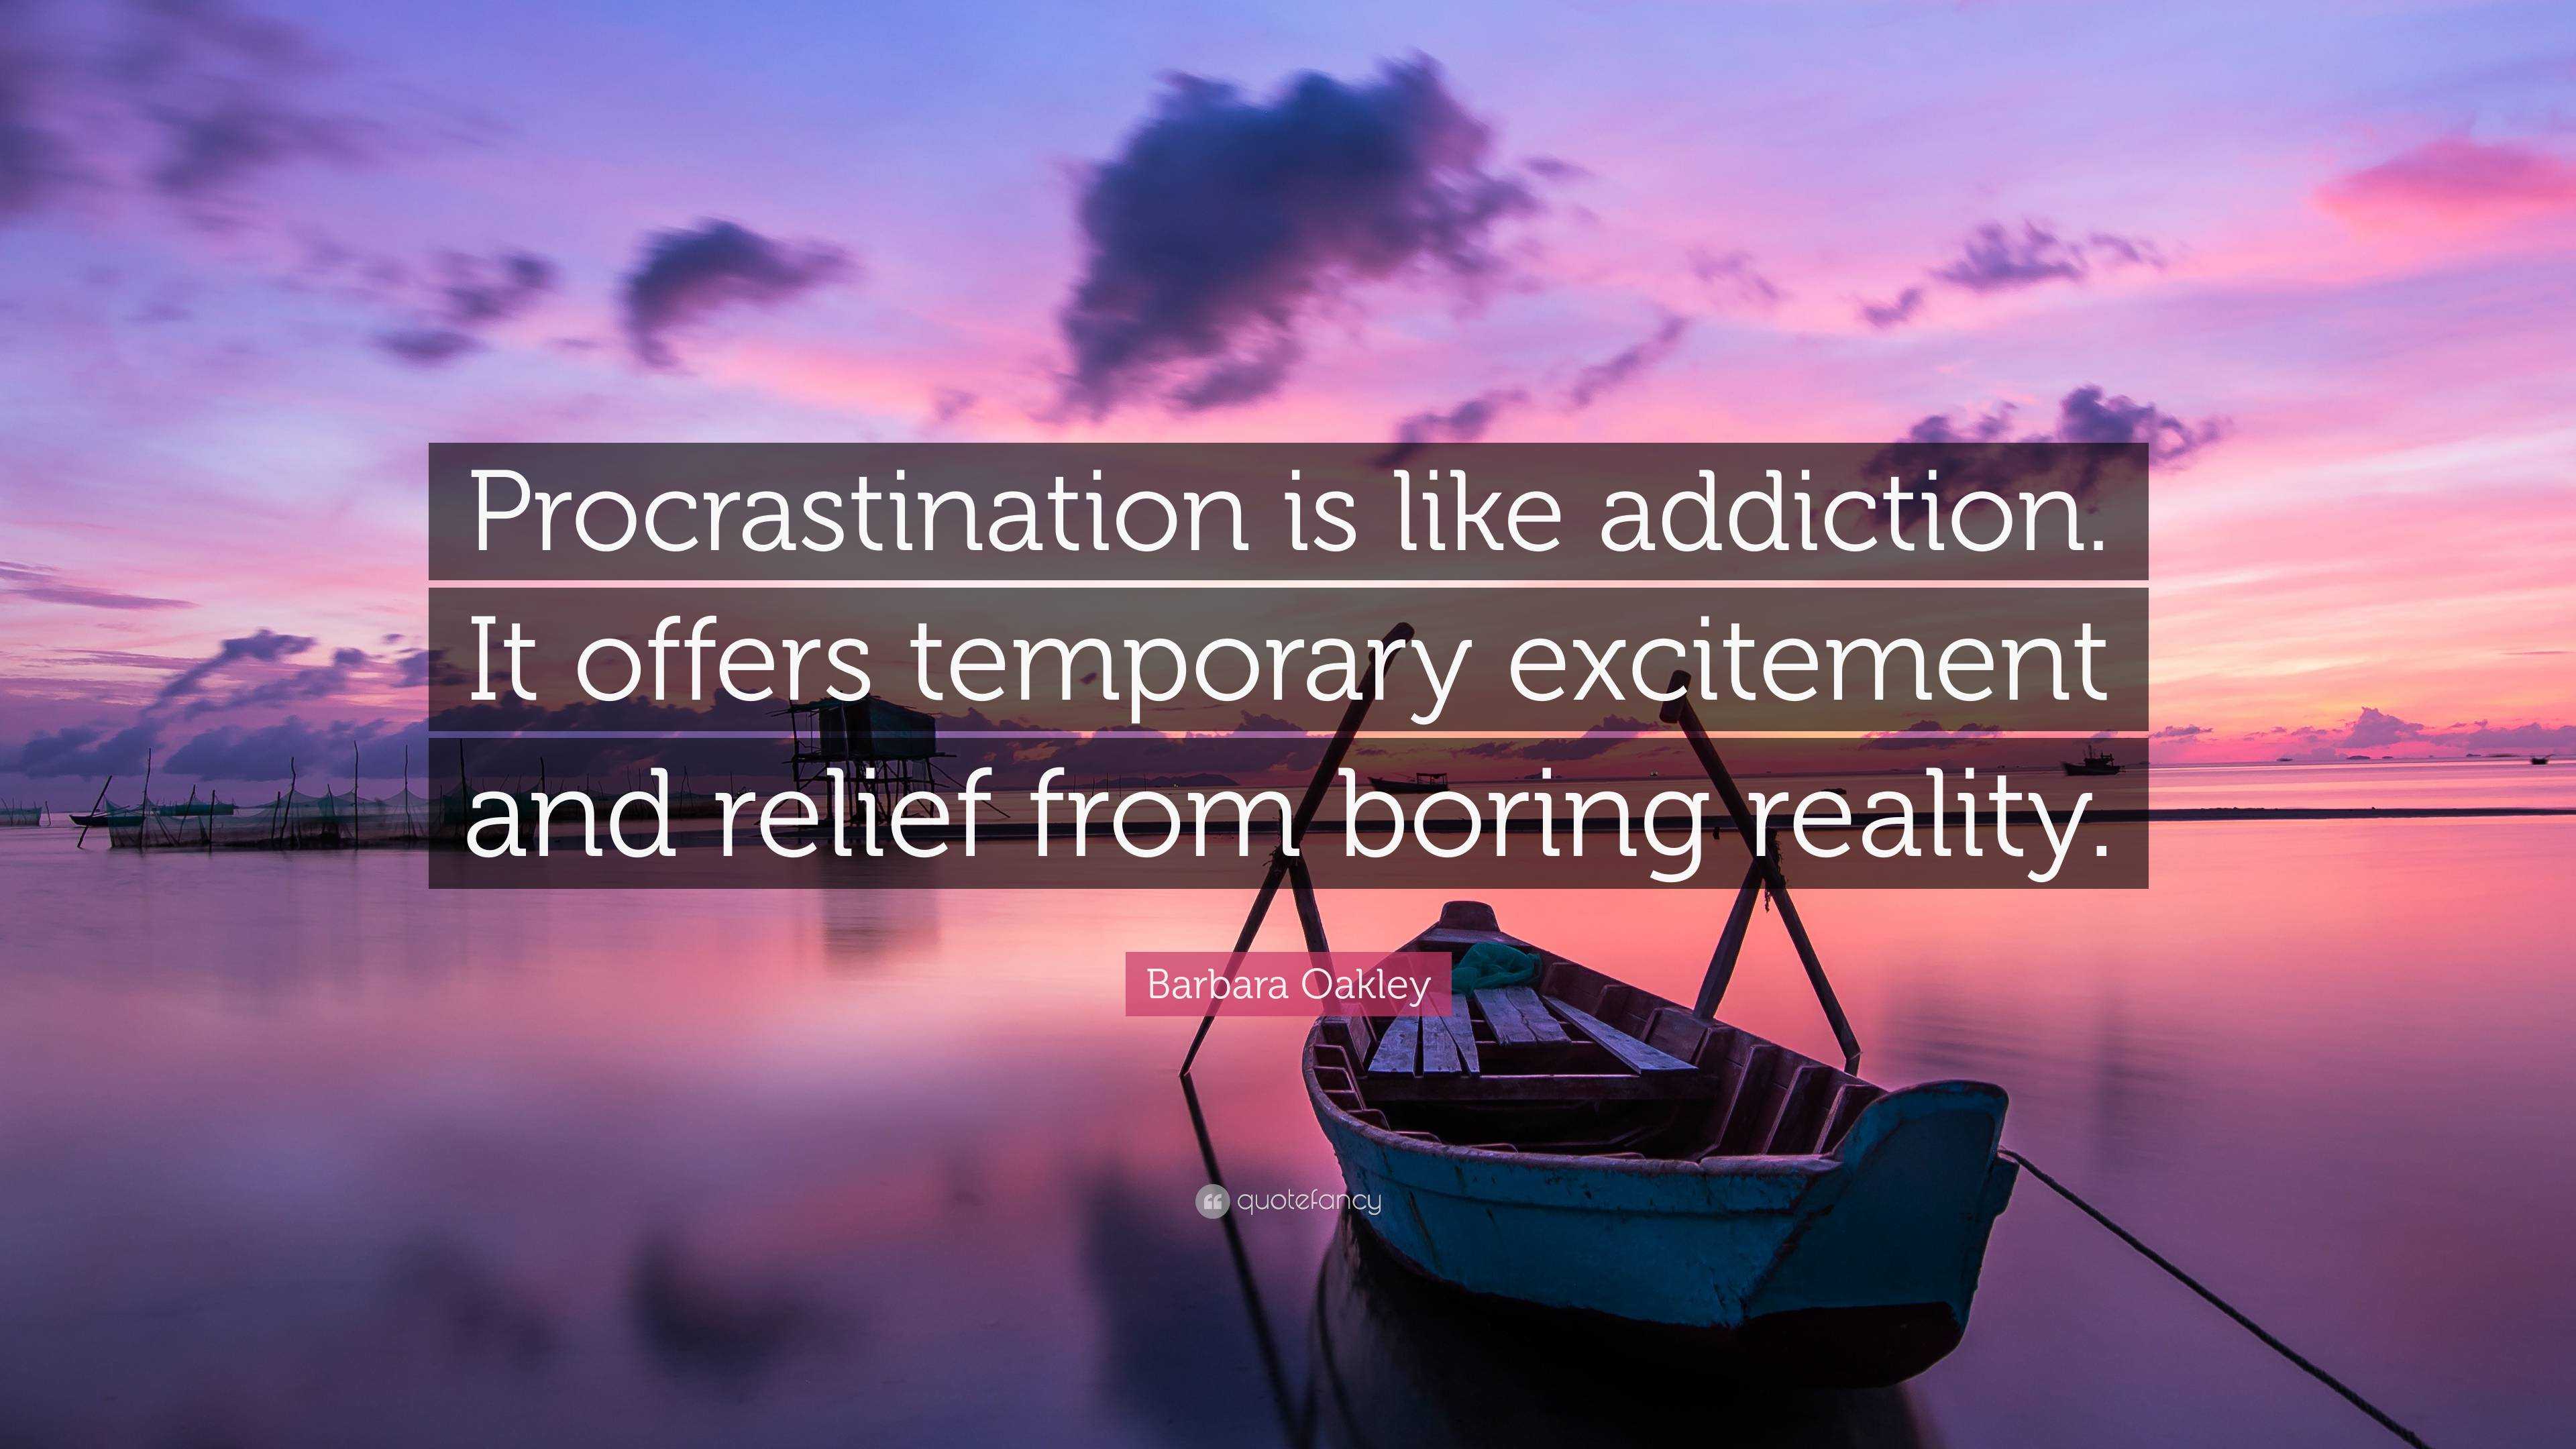 Barbara Oakley Quote: “Procrastination is like addiction. It offers  temporary excitement and relief from boring reality.”